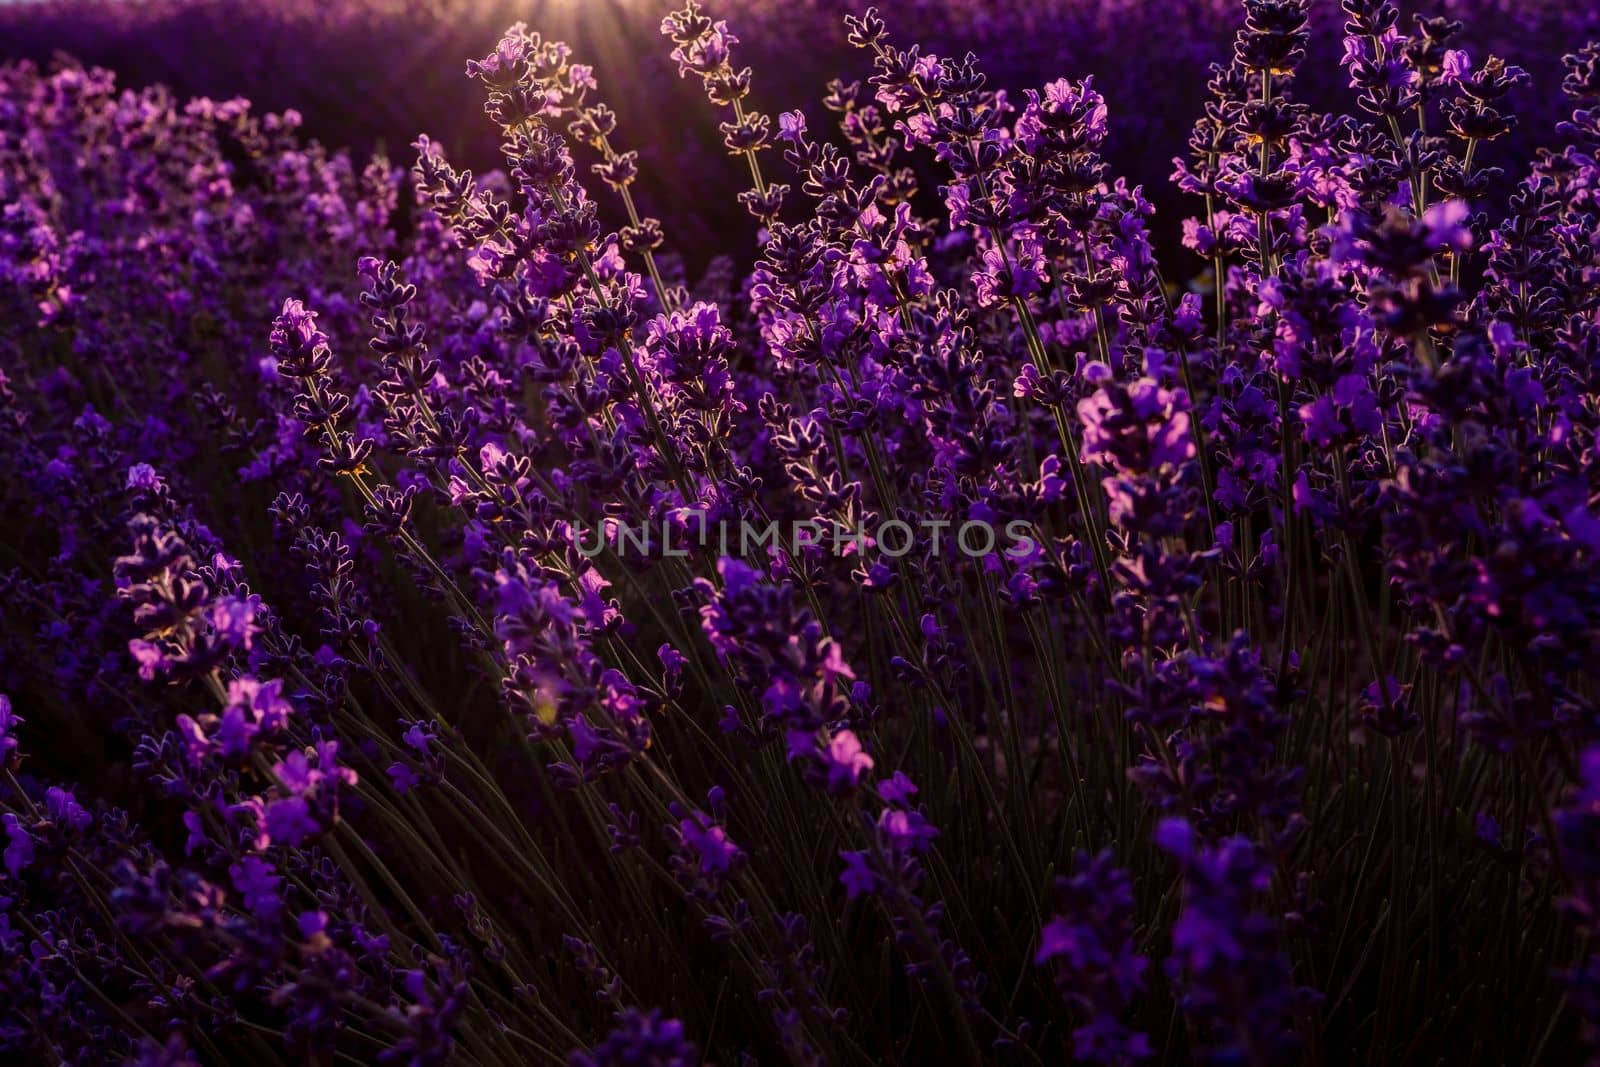 colorful sunset at lavender field in summer purple aromatic flowers